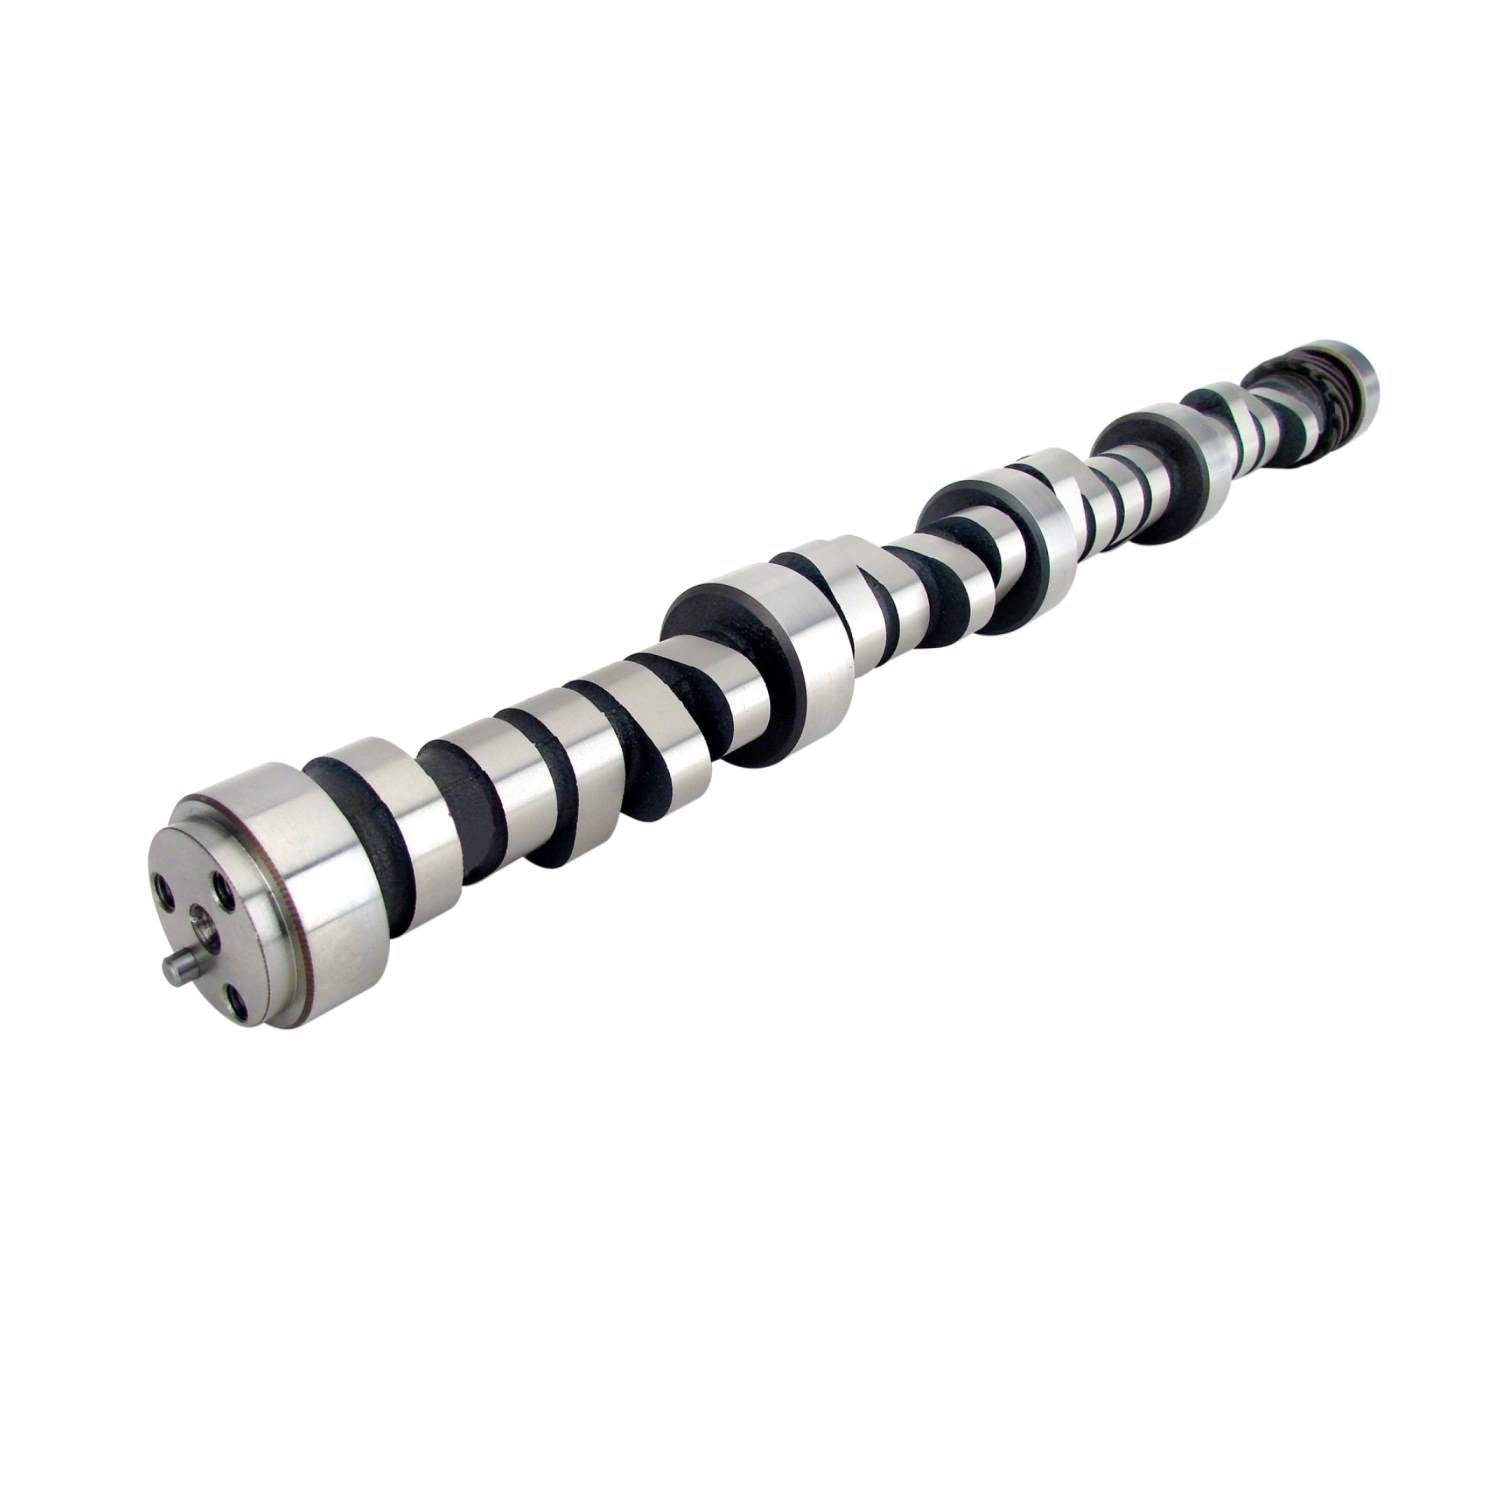 Competition Cams 01-708-9 Drag Race Camshaft